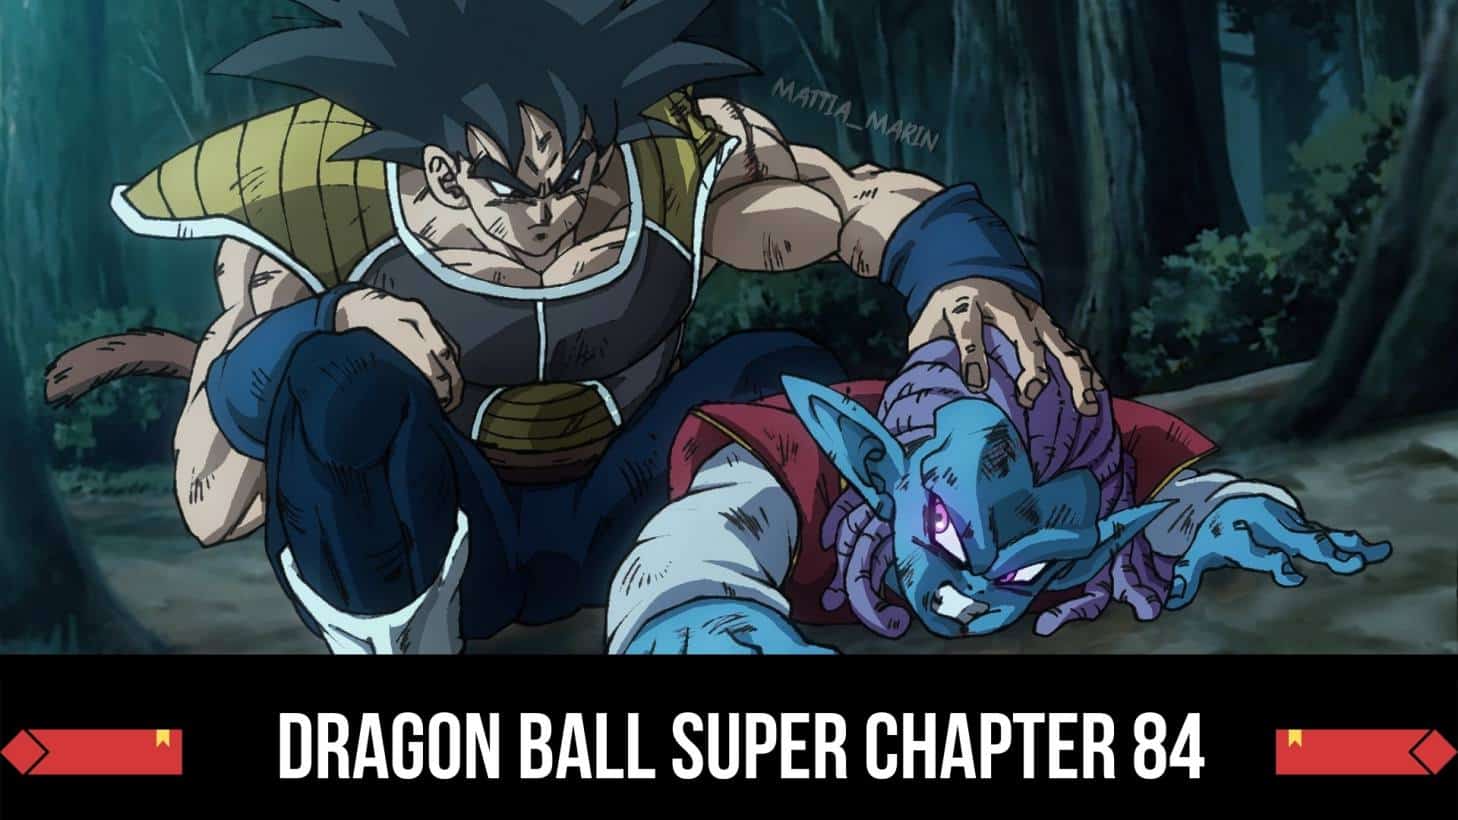 Dragon Ball Super Chapter 84 Release Date Out, When Does it Release?